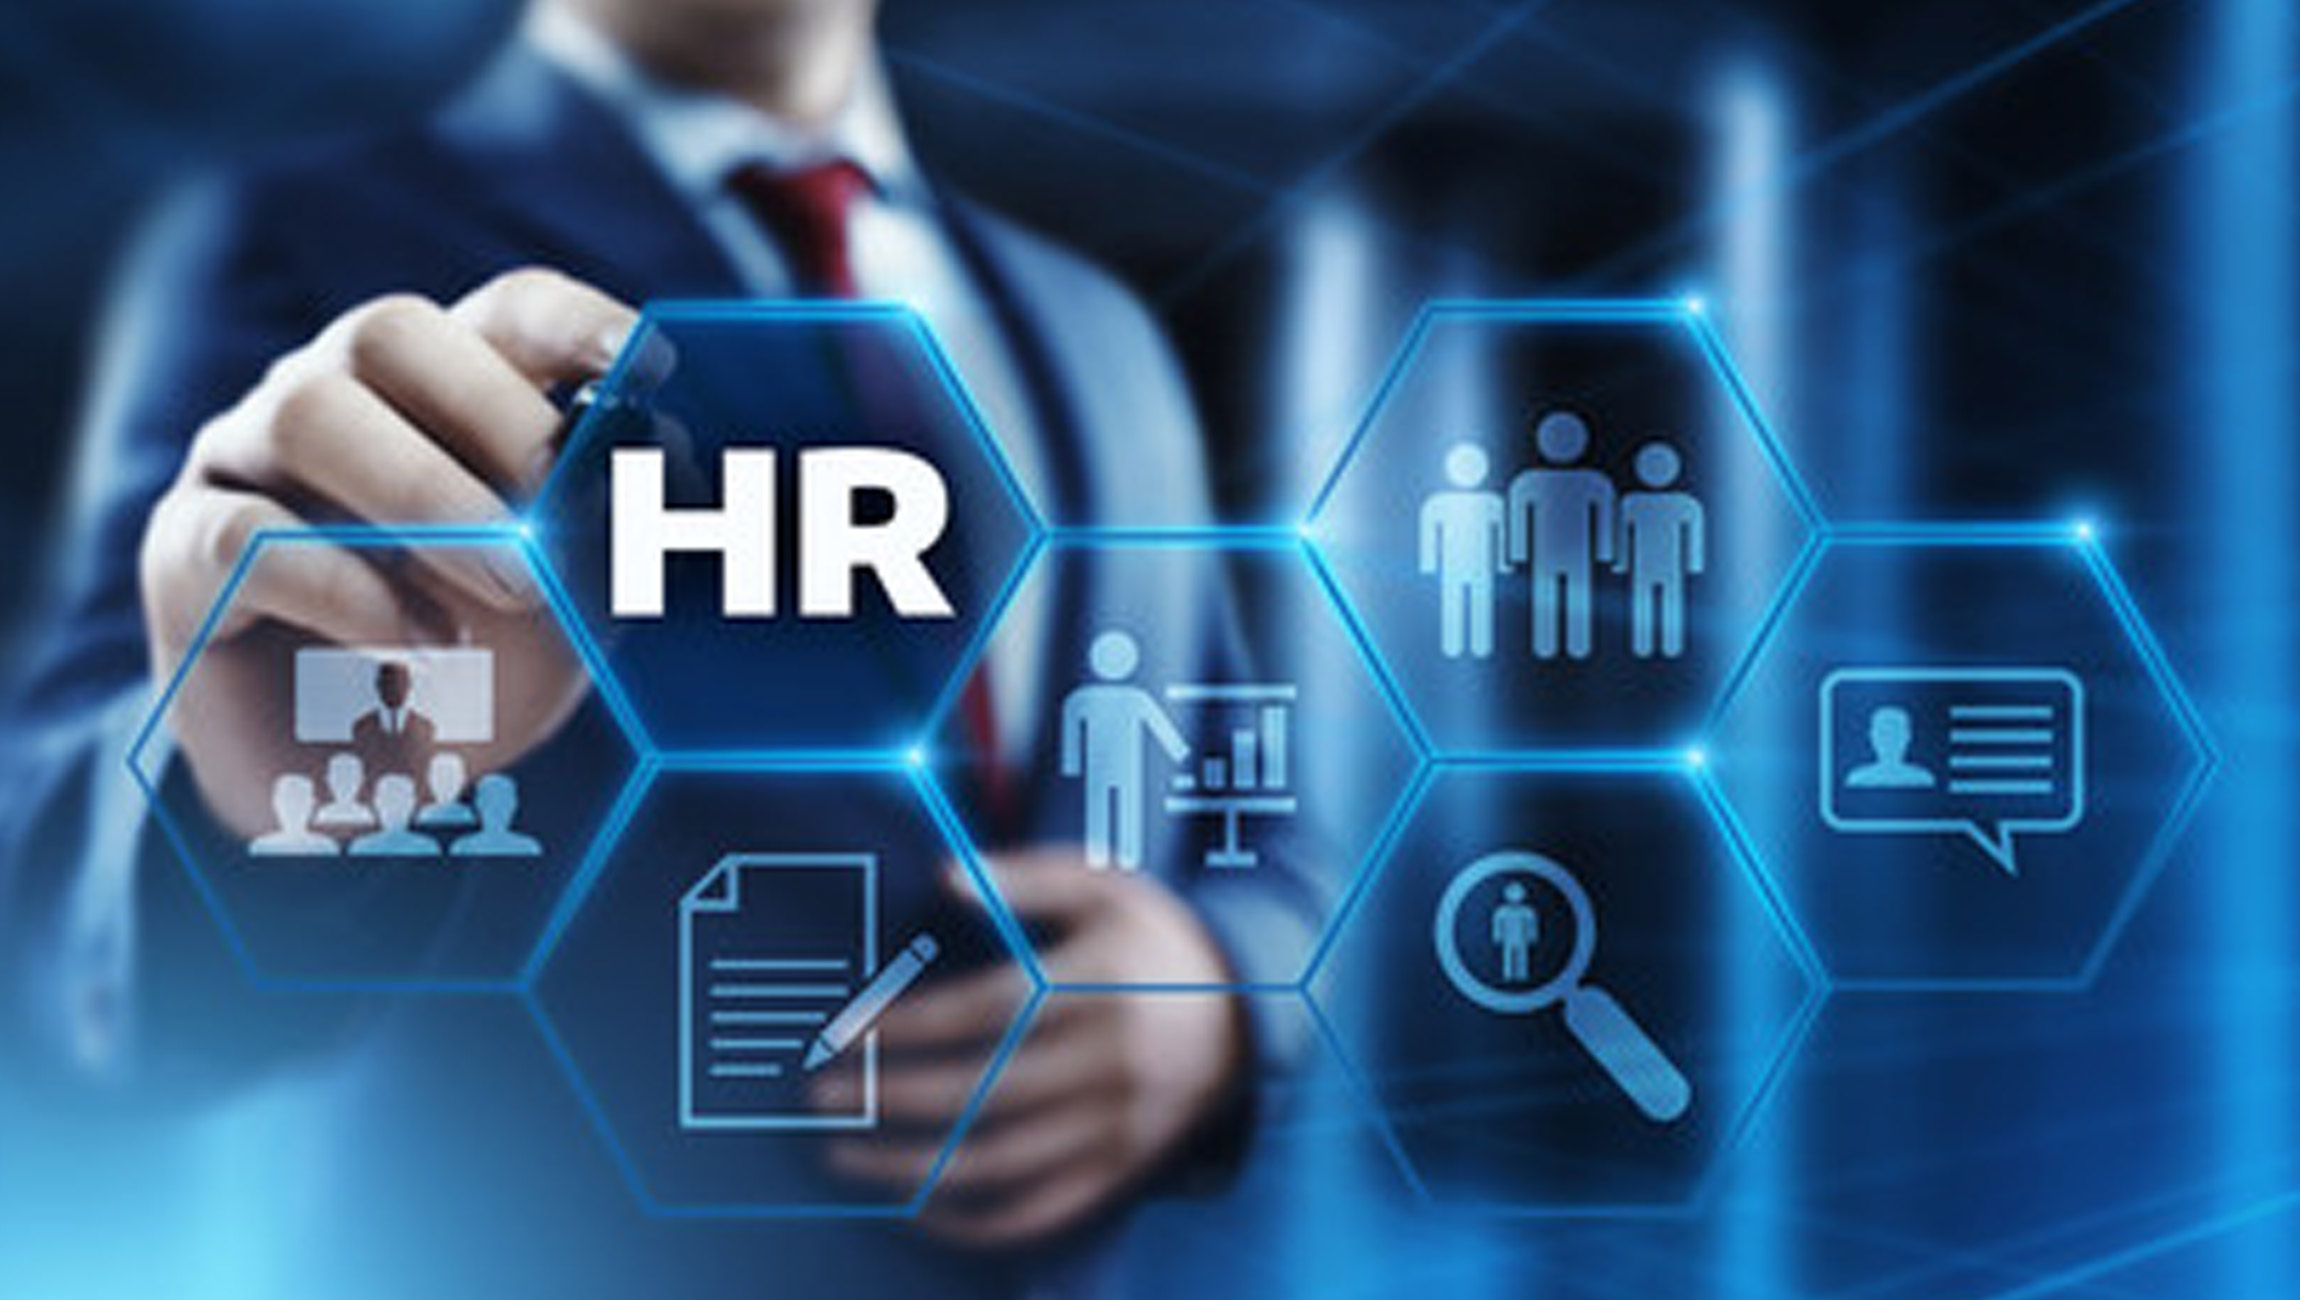 Top European HR Tech Innovators Who Changed The Game In 2020